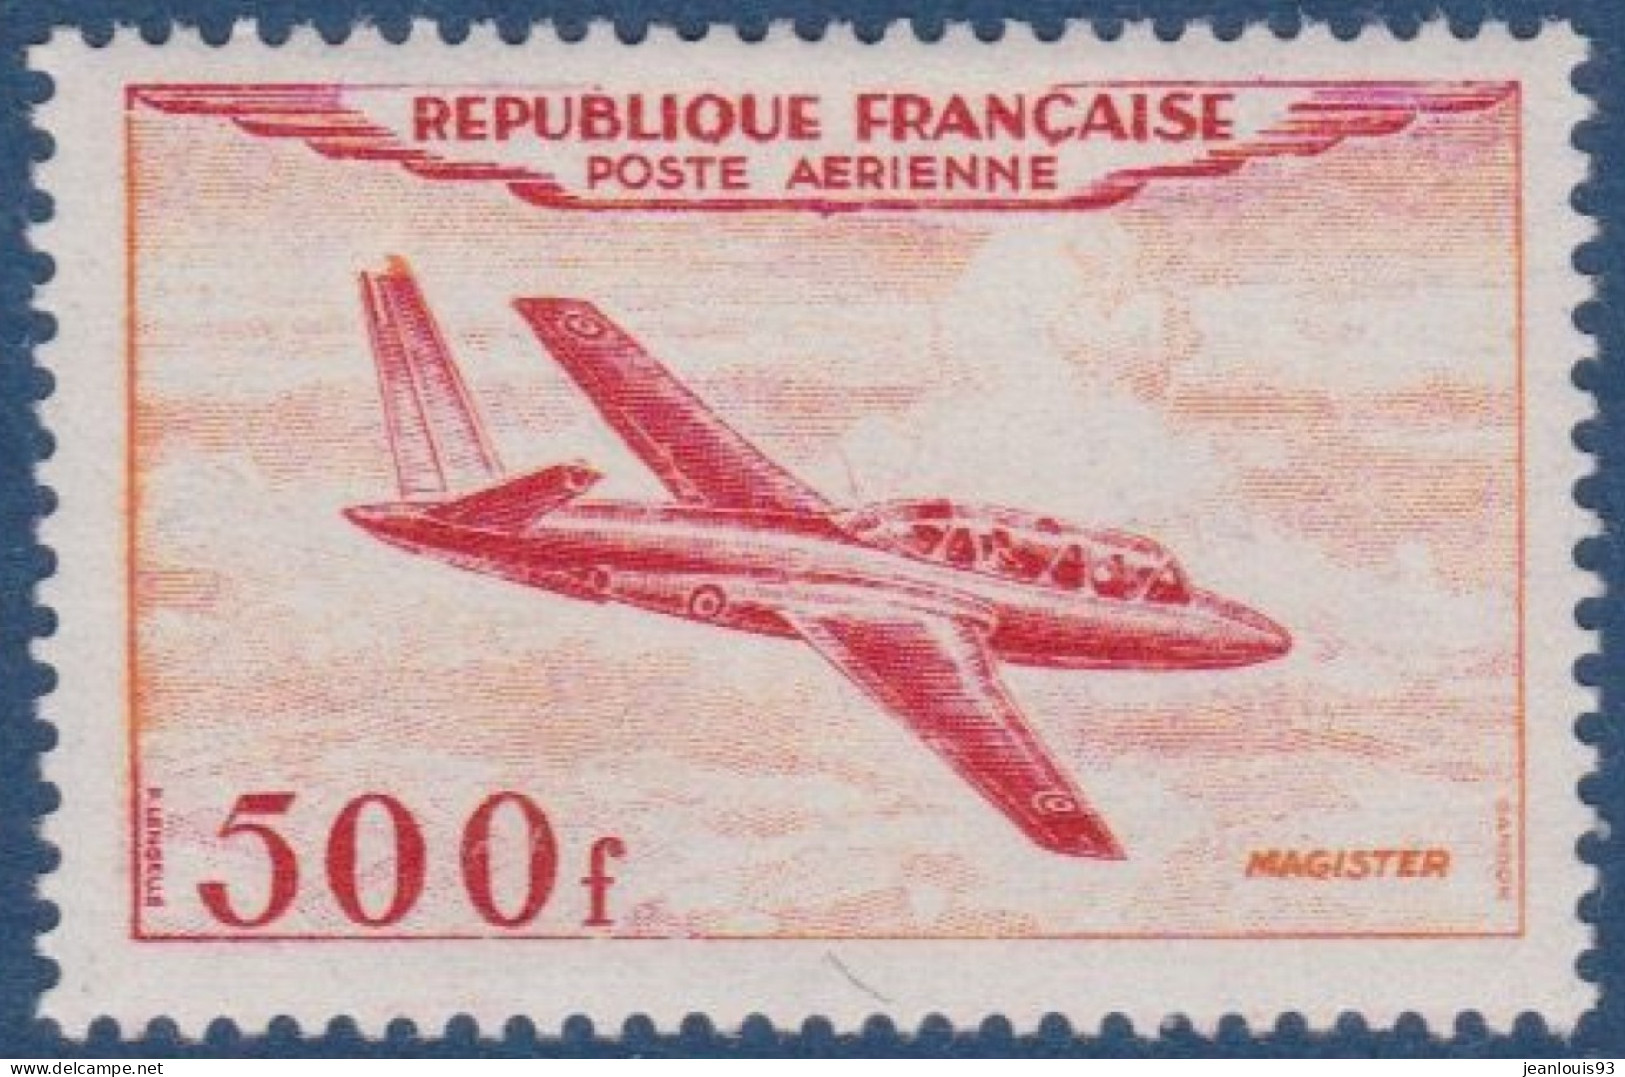 FRANCE - PA 32  FOUGA 500F NEUF AVEC CHARNIERE PROPRE COTE 110 EUR - 1927-1959 Mint/hinged